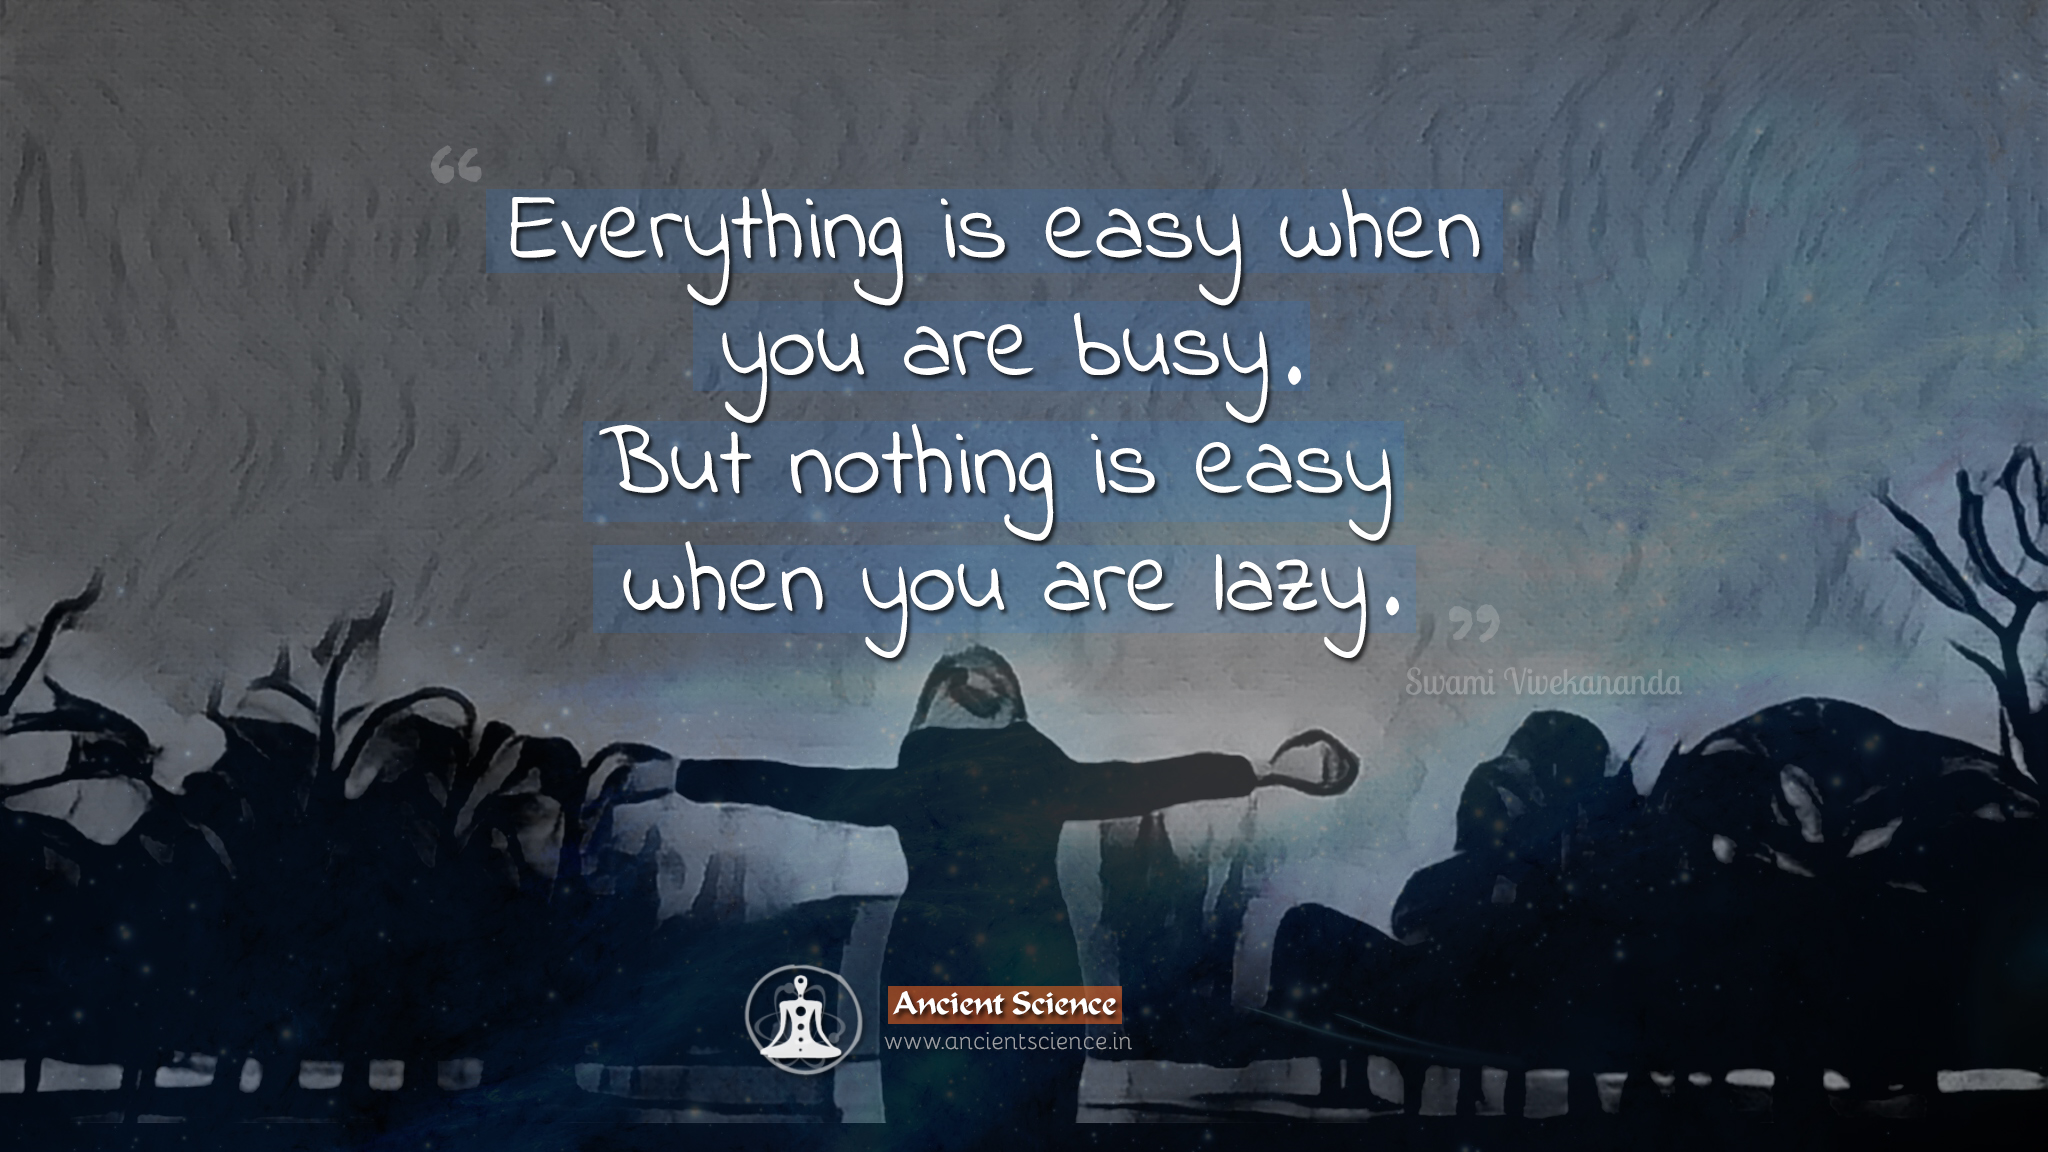 Everything is easy when you are busy. But nothing is easy when you are lazy